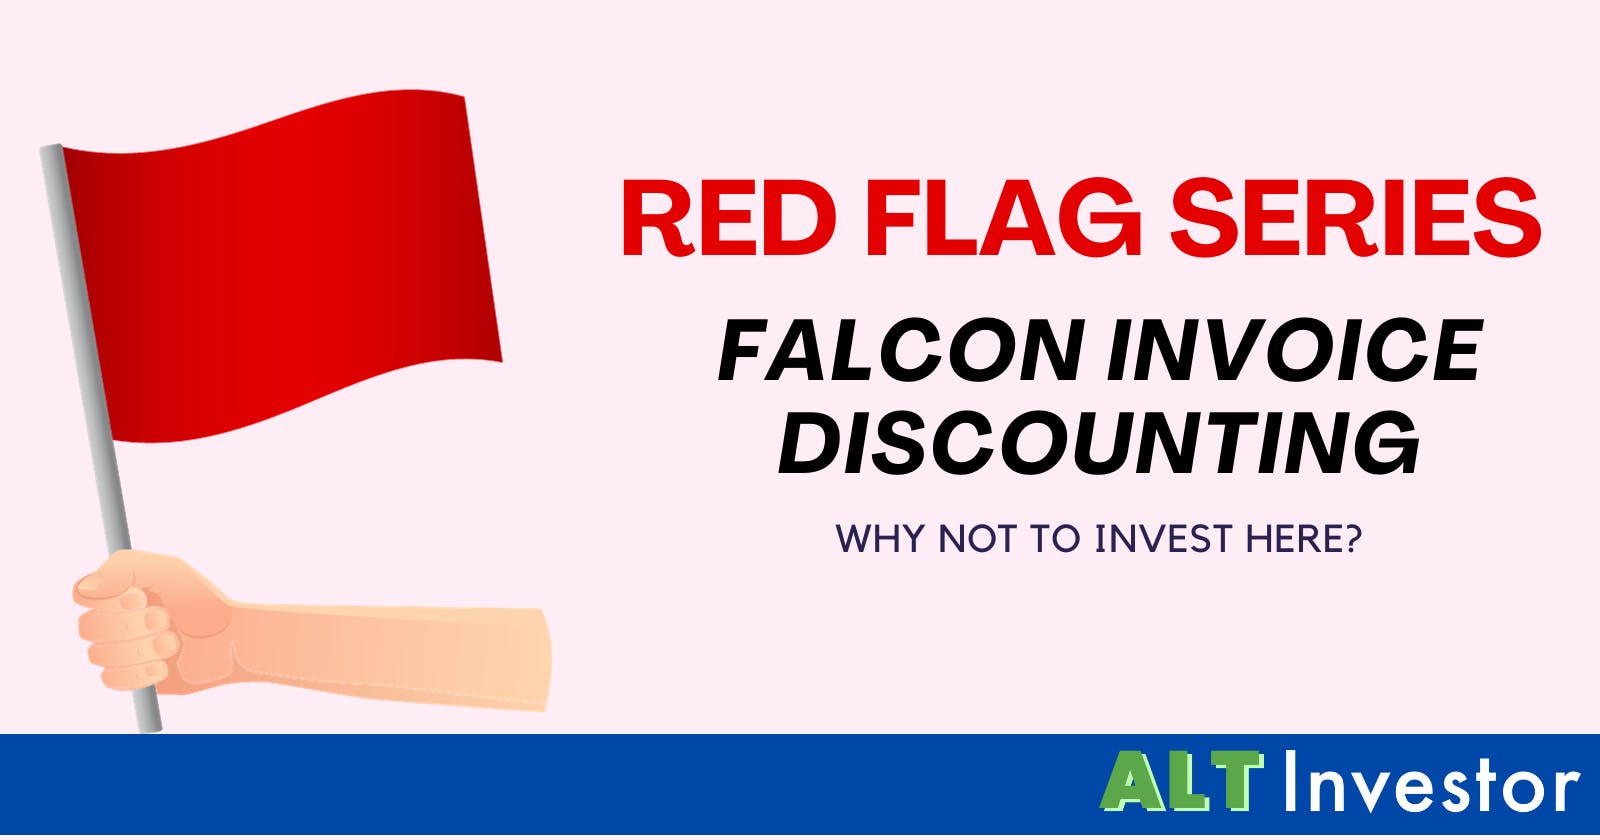 Red Flag Series: Falcon Invoice Discounting